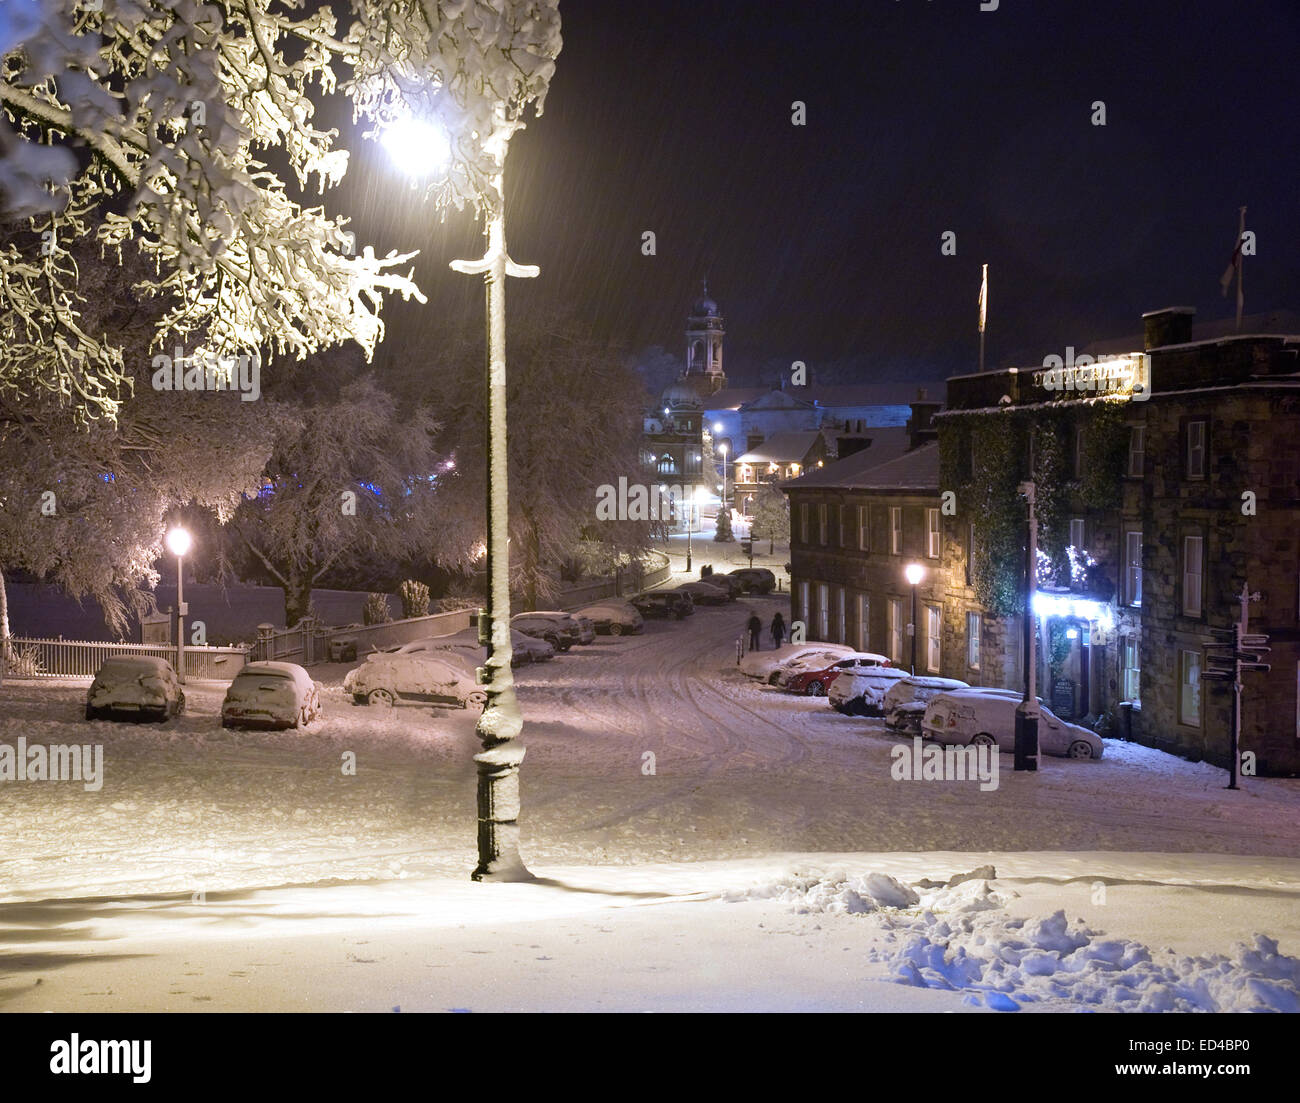 The centre of Buxton, Derbyshire at night after heavy snow Stock Photo